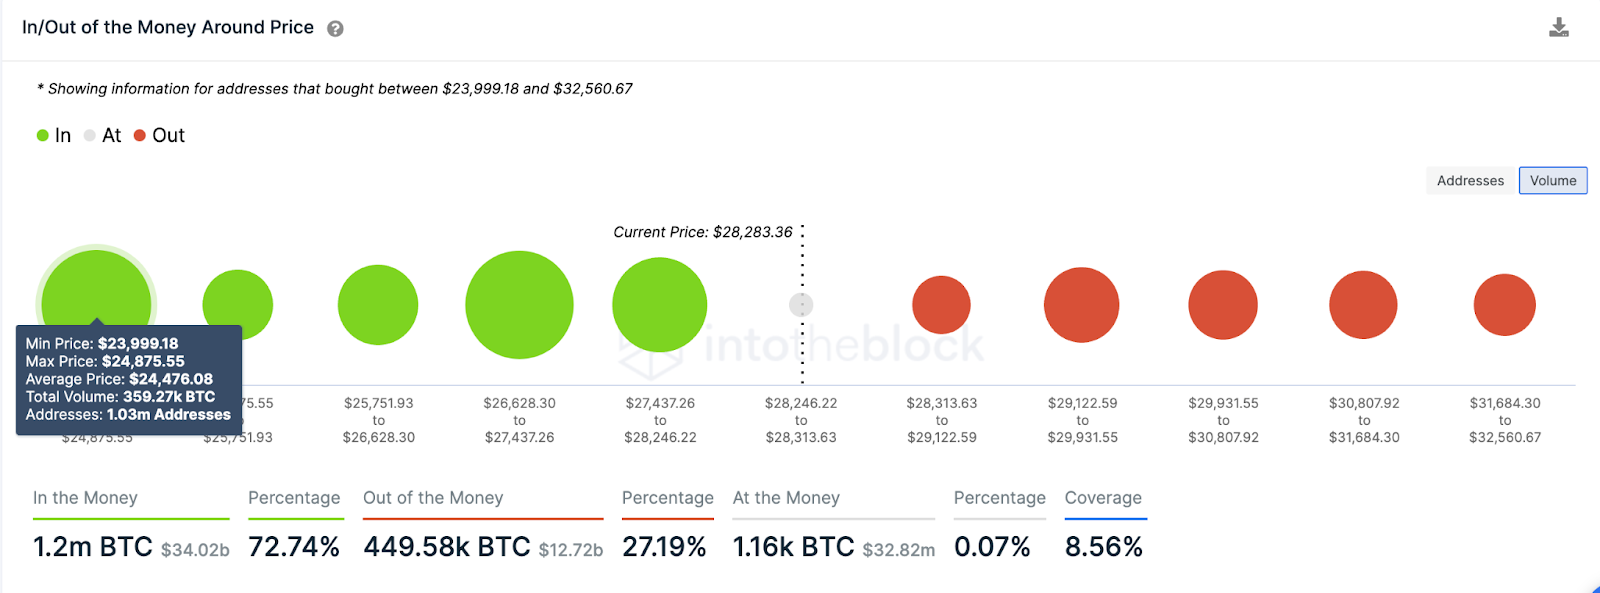 Bitcoin (BTC) Price In/Out of Money data. March 2023.